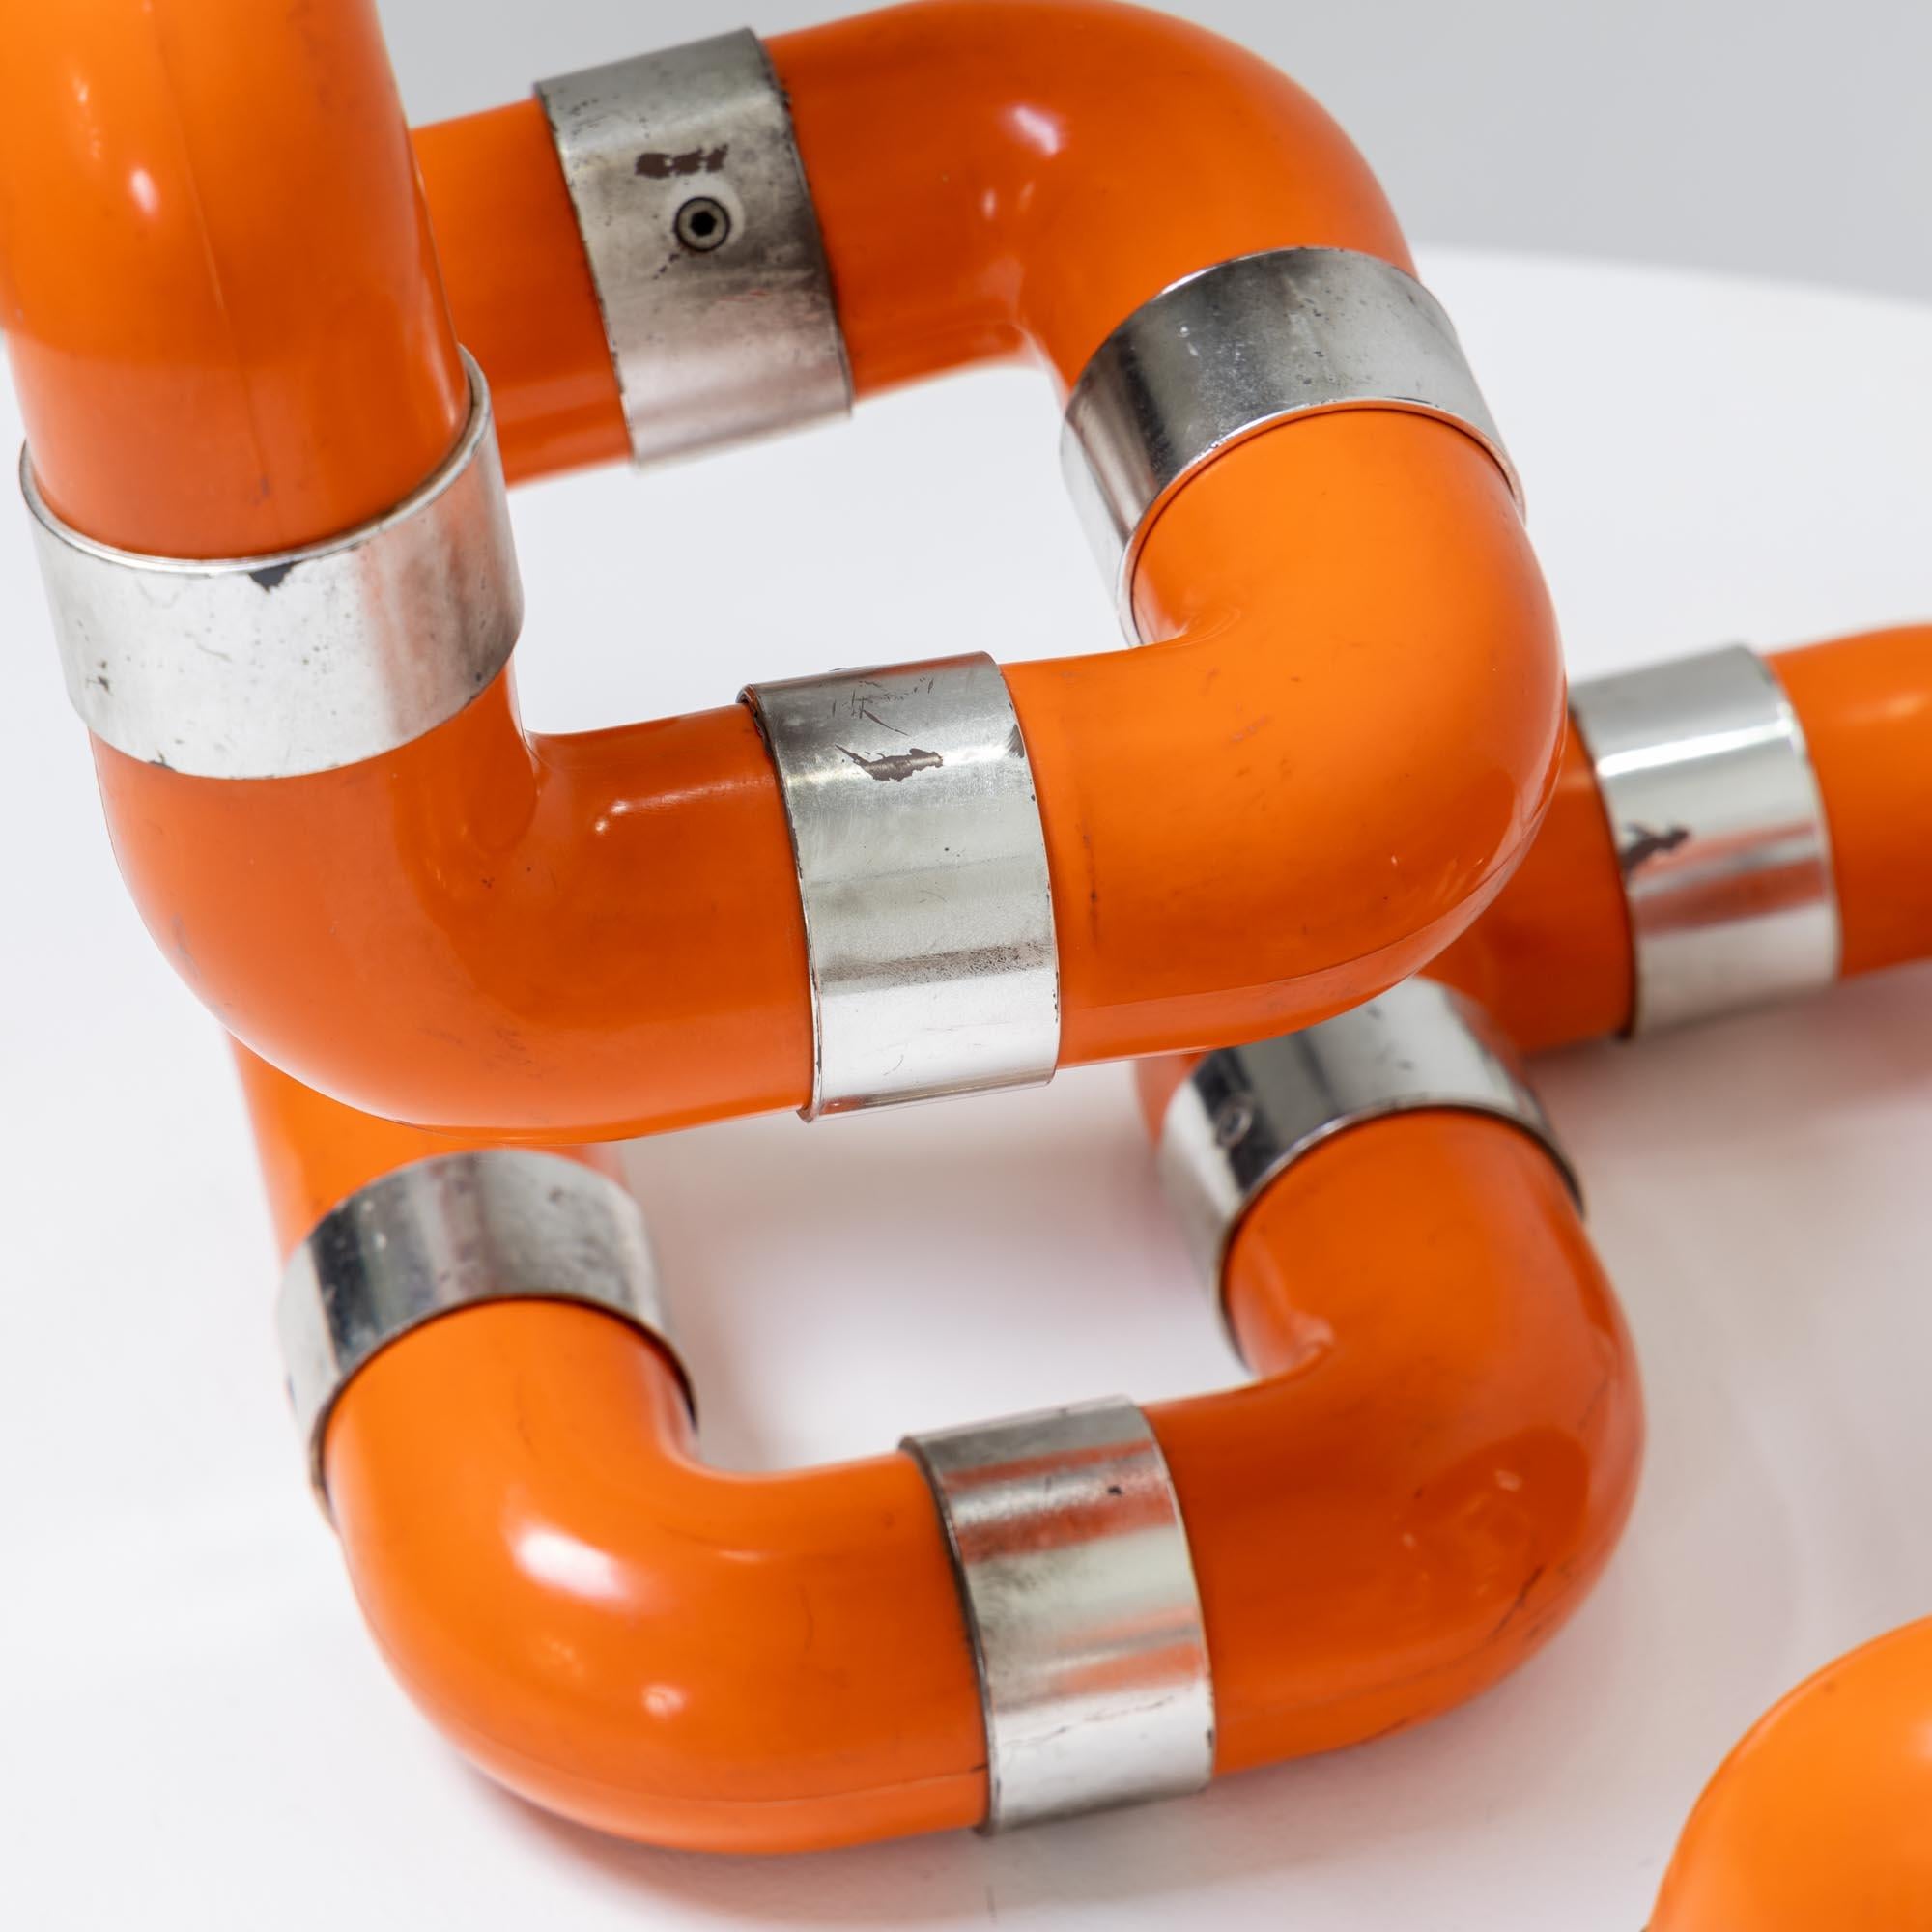 Two Rombo table lamps by Gaetano Missaglia made of L-shaped orange plastic tubes with chrome-plated connections and one socket each. We assume no liability or warranty for the electrification.